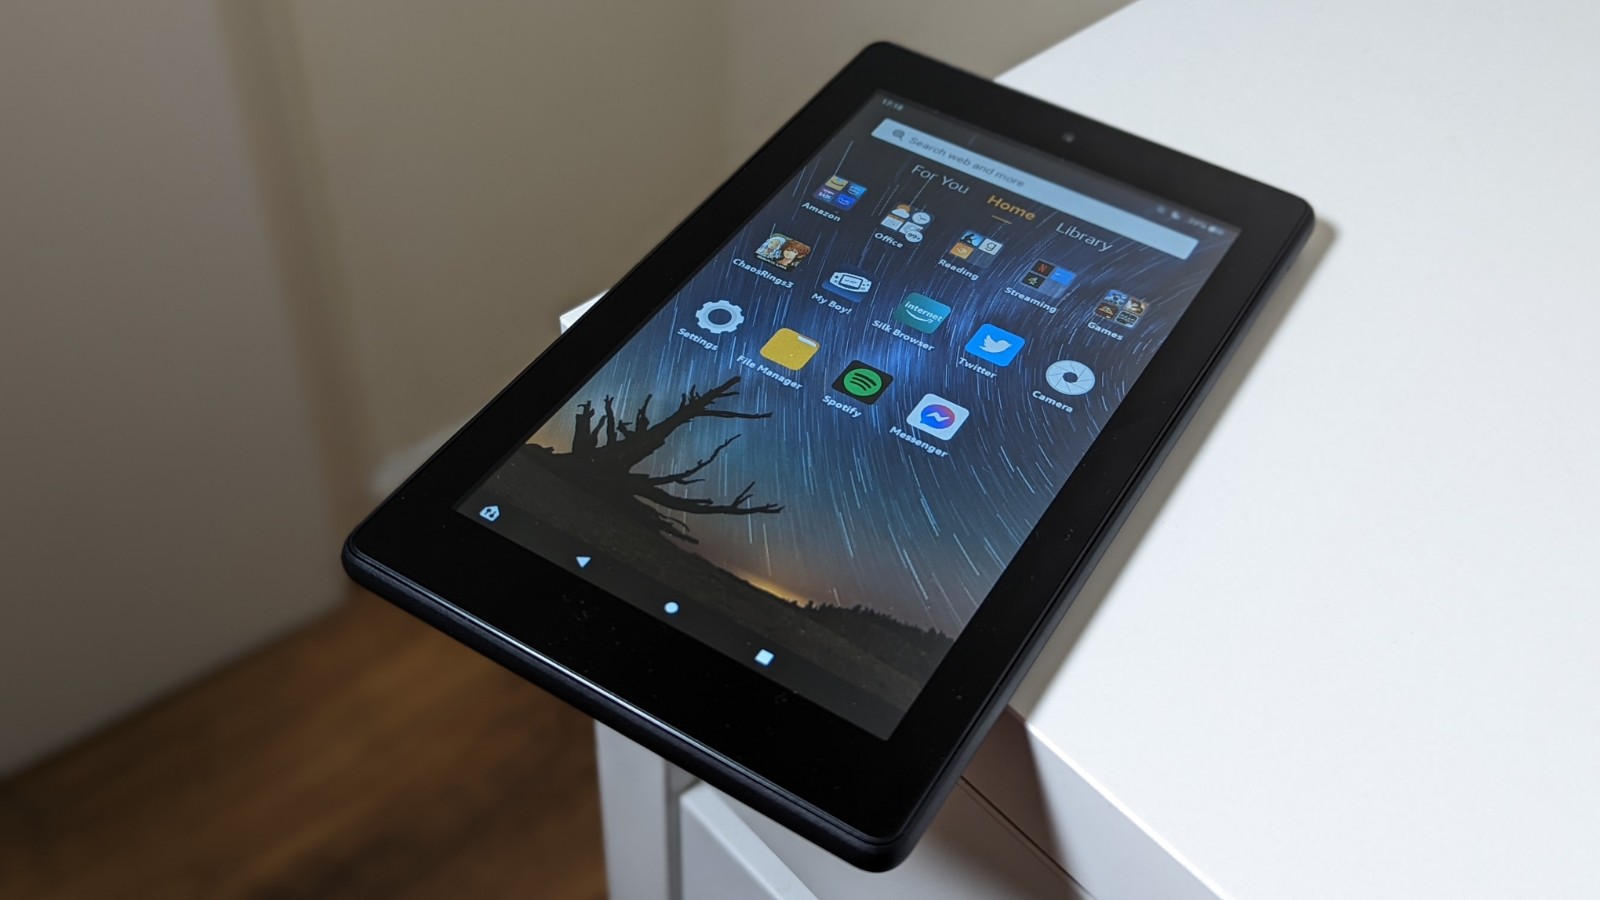 The  Fire 7 is a great ultra-affordable tablet - Phandroid